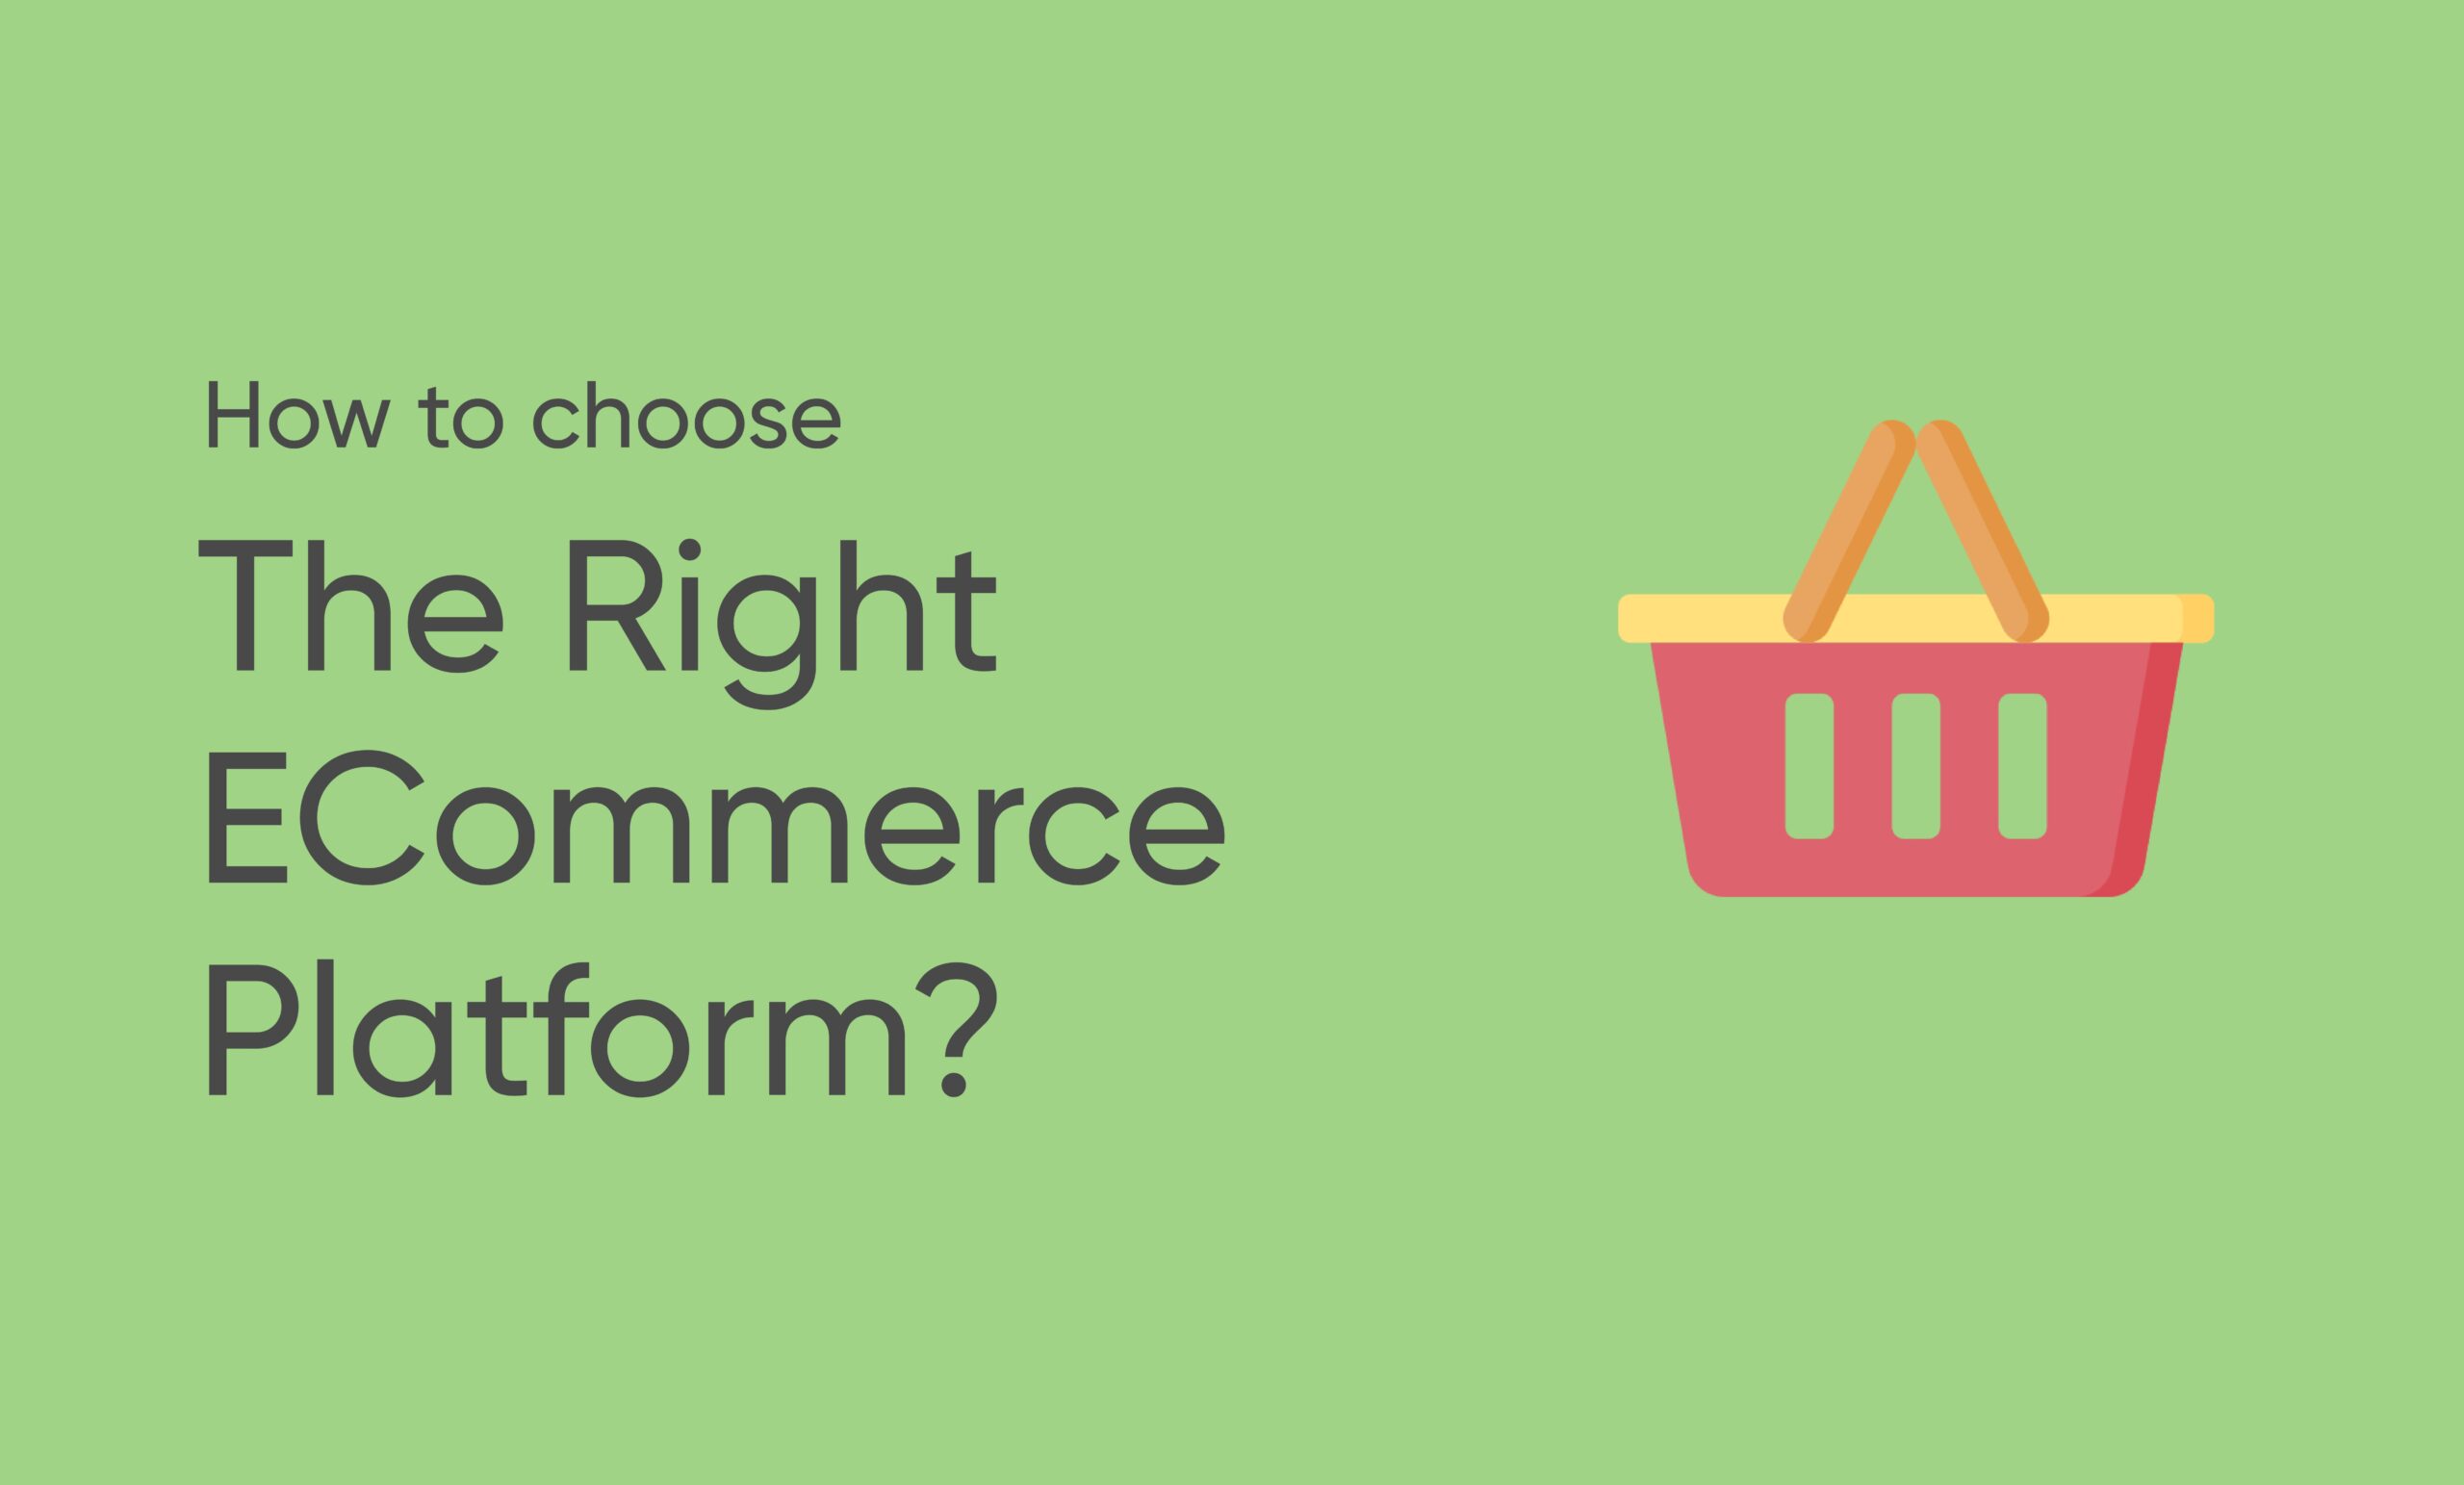 How to Choose the right ecommerce platform